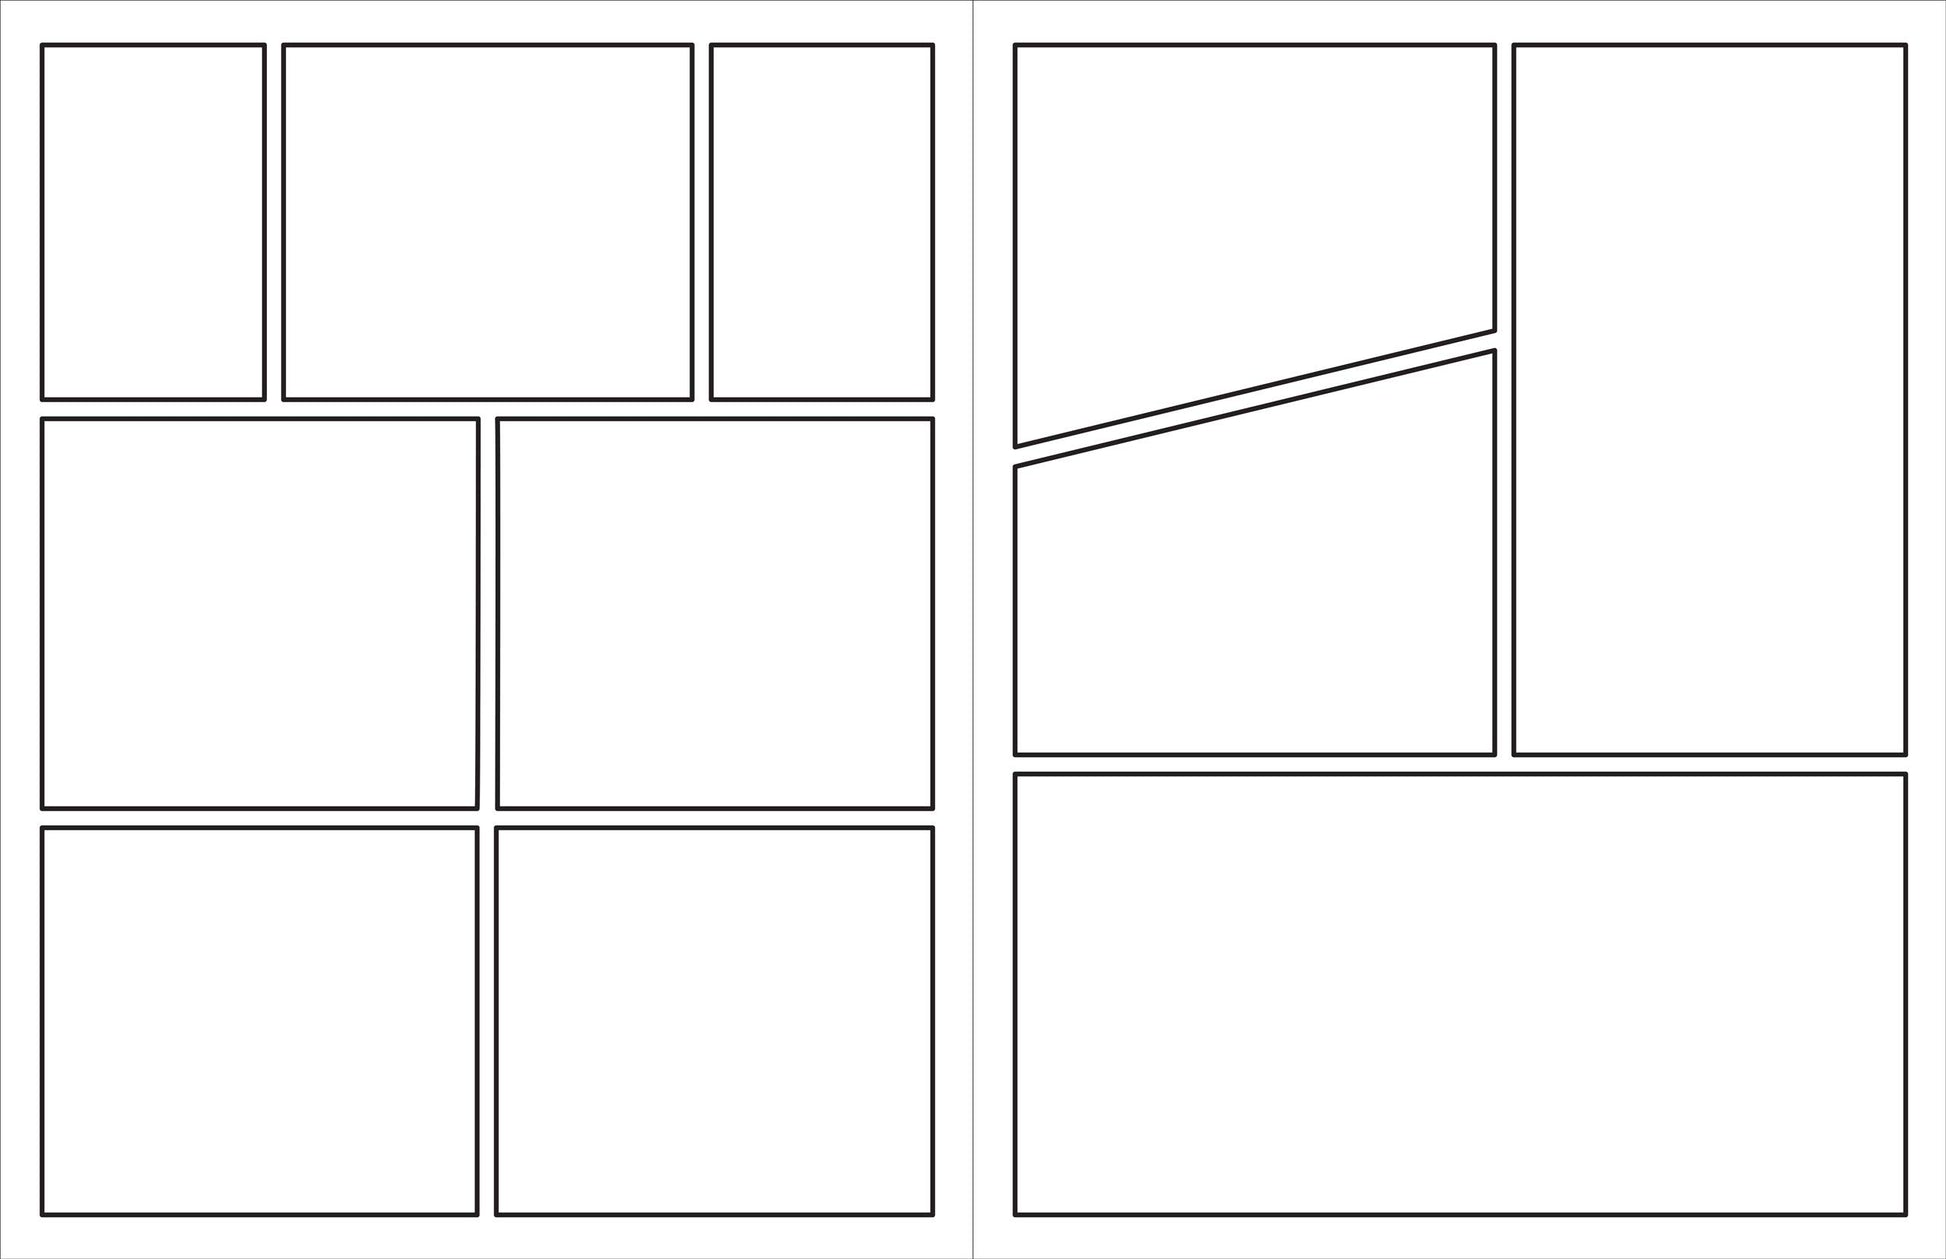 Empty Comic Book For Drawing: Create Your Own Comic Book Kit